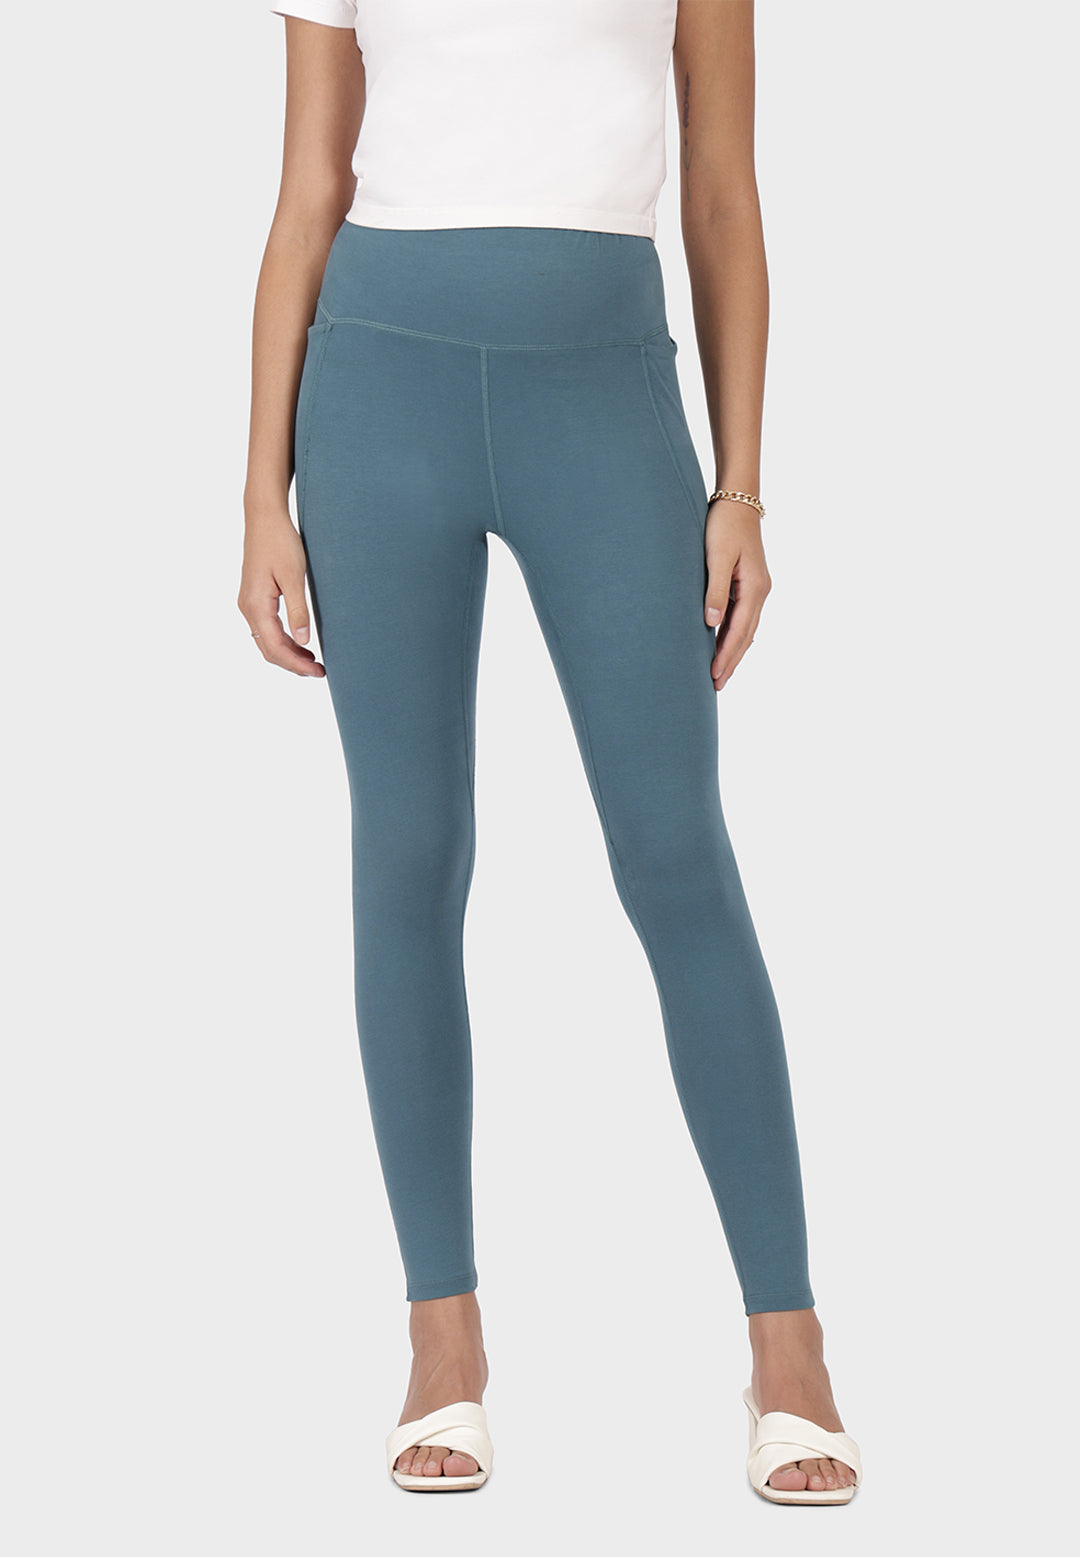 Cotton Leggings Various Types of Thickness Full Length Sizes and Colours